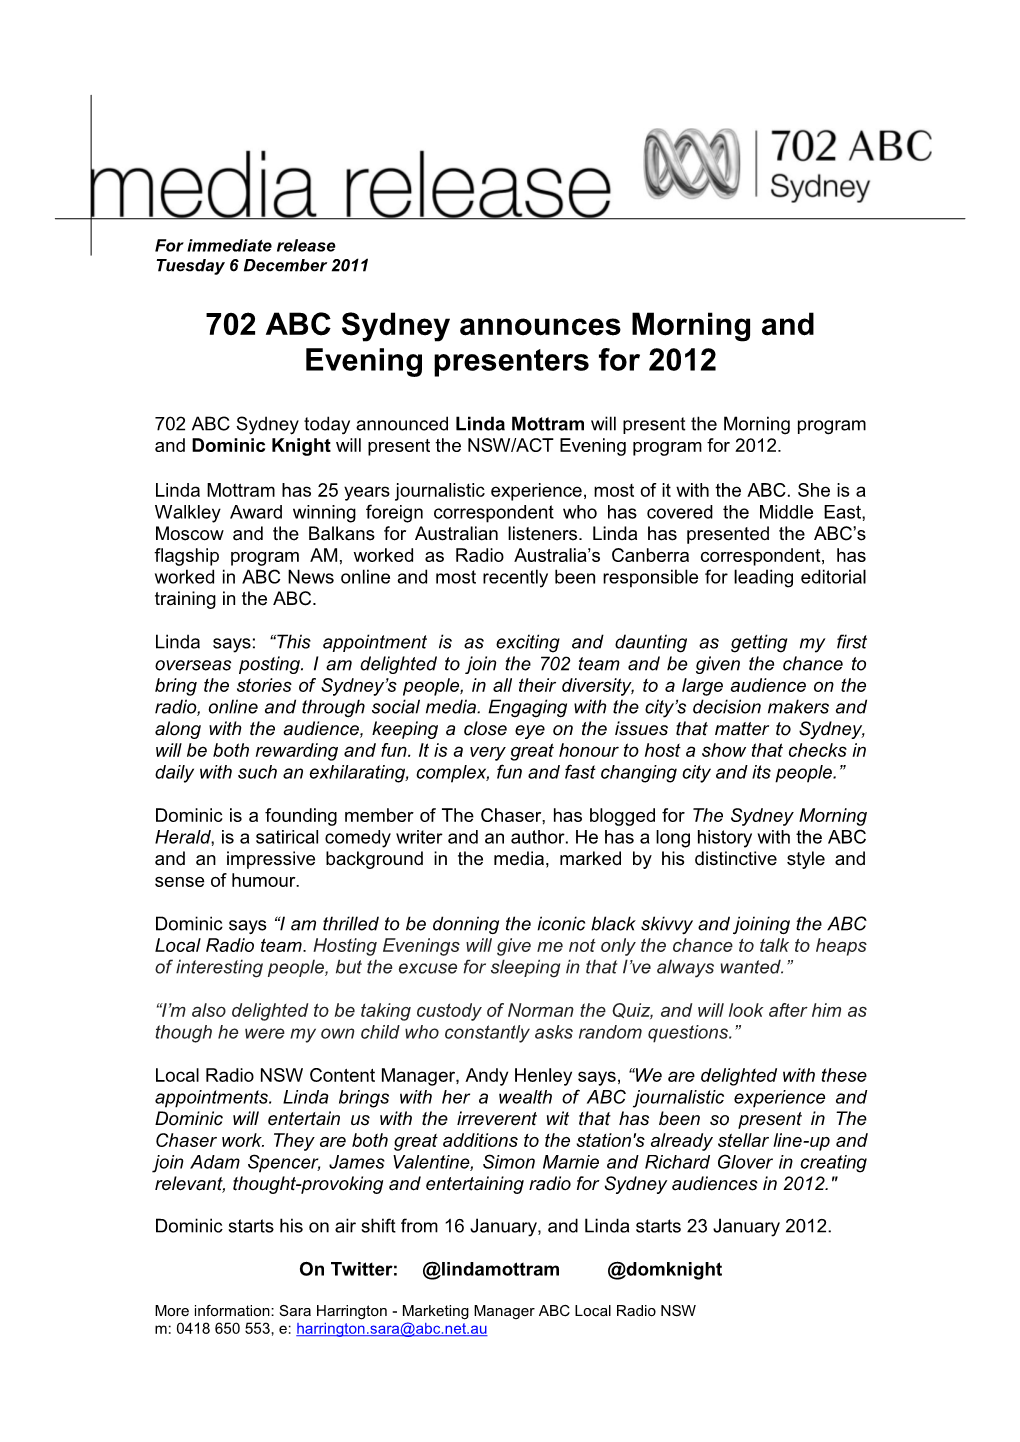 702 ABC Sydney Announces Morning and Evening Presenters for 2012